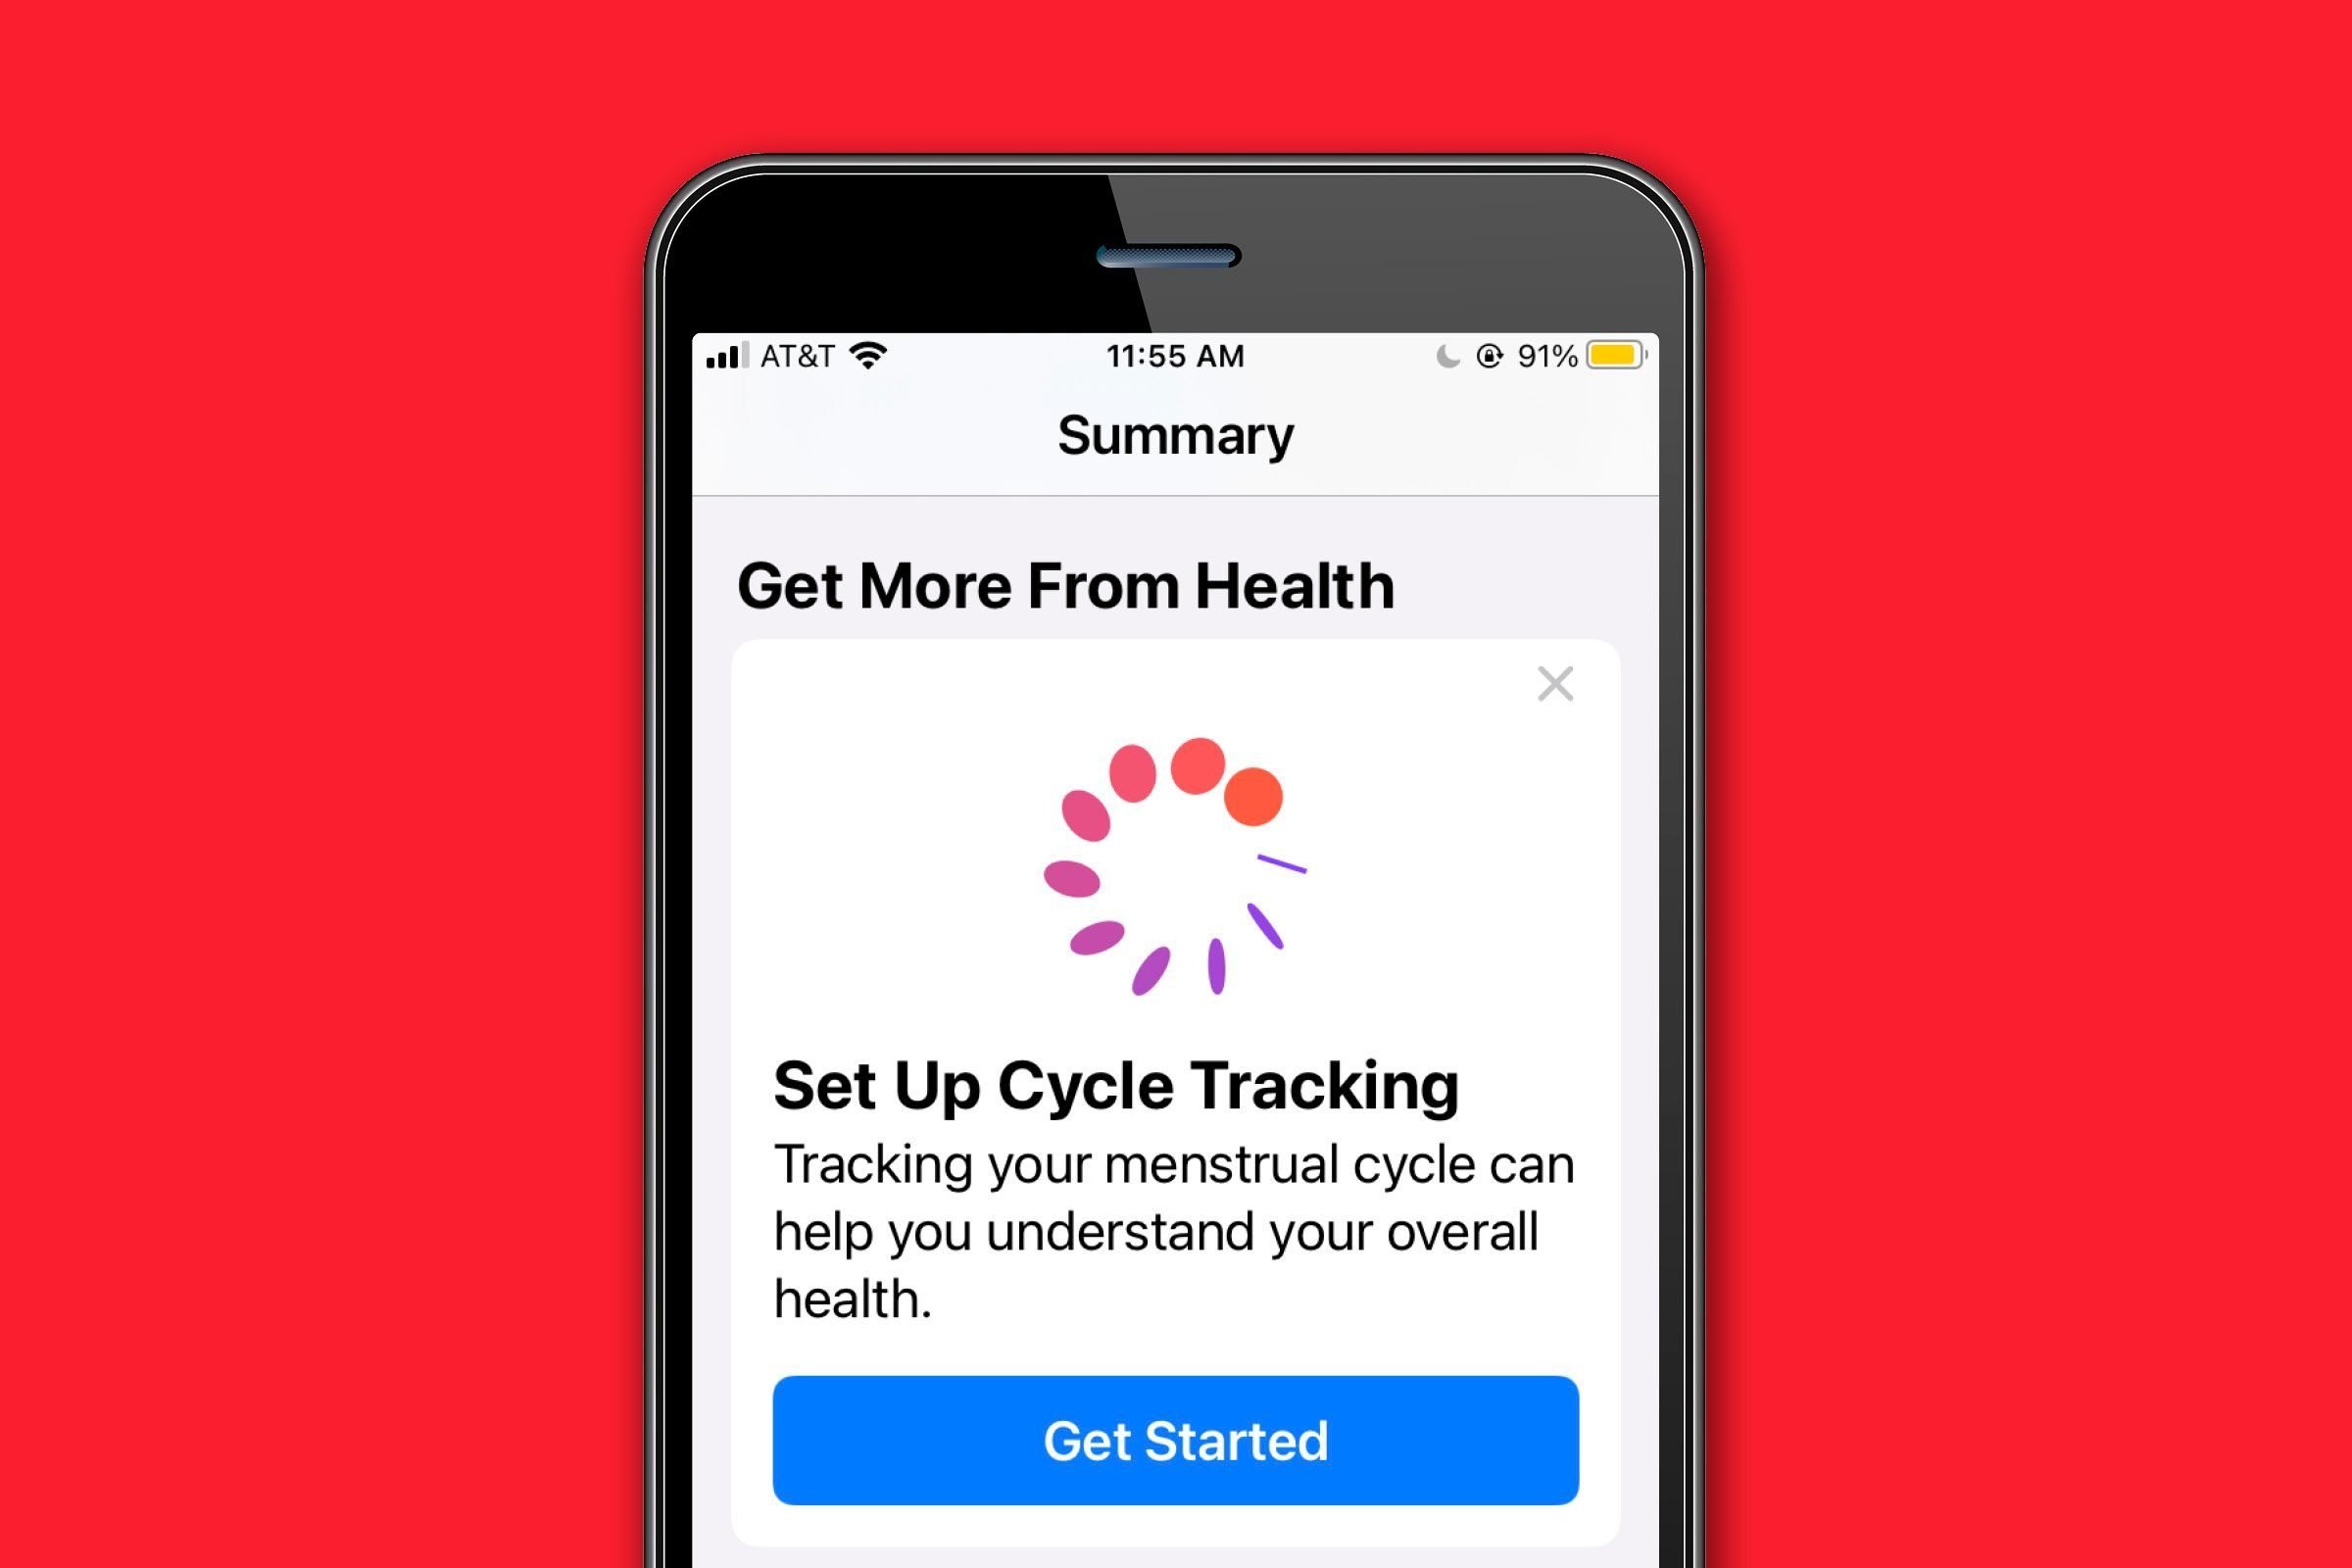 Track your menstrual cycle and other health data